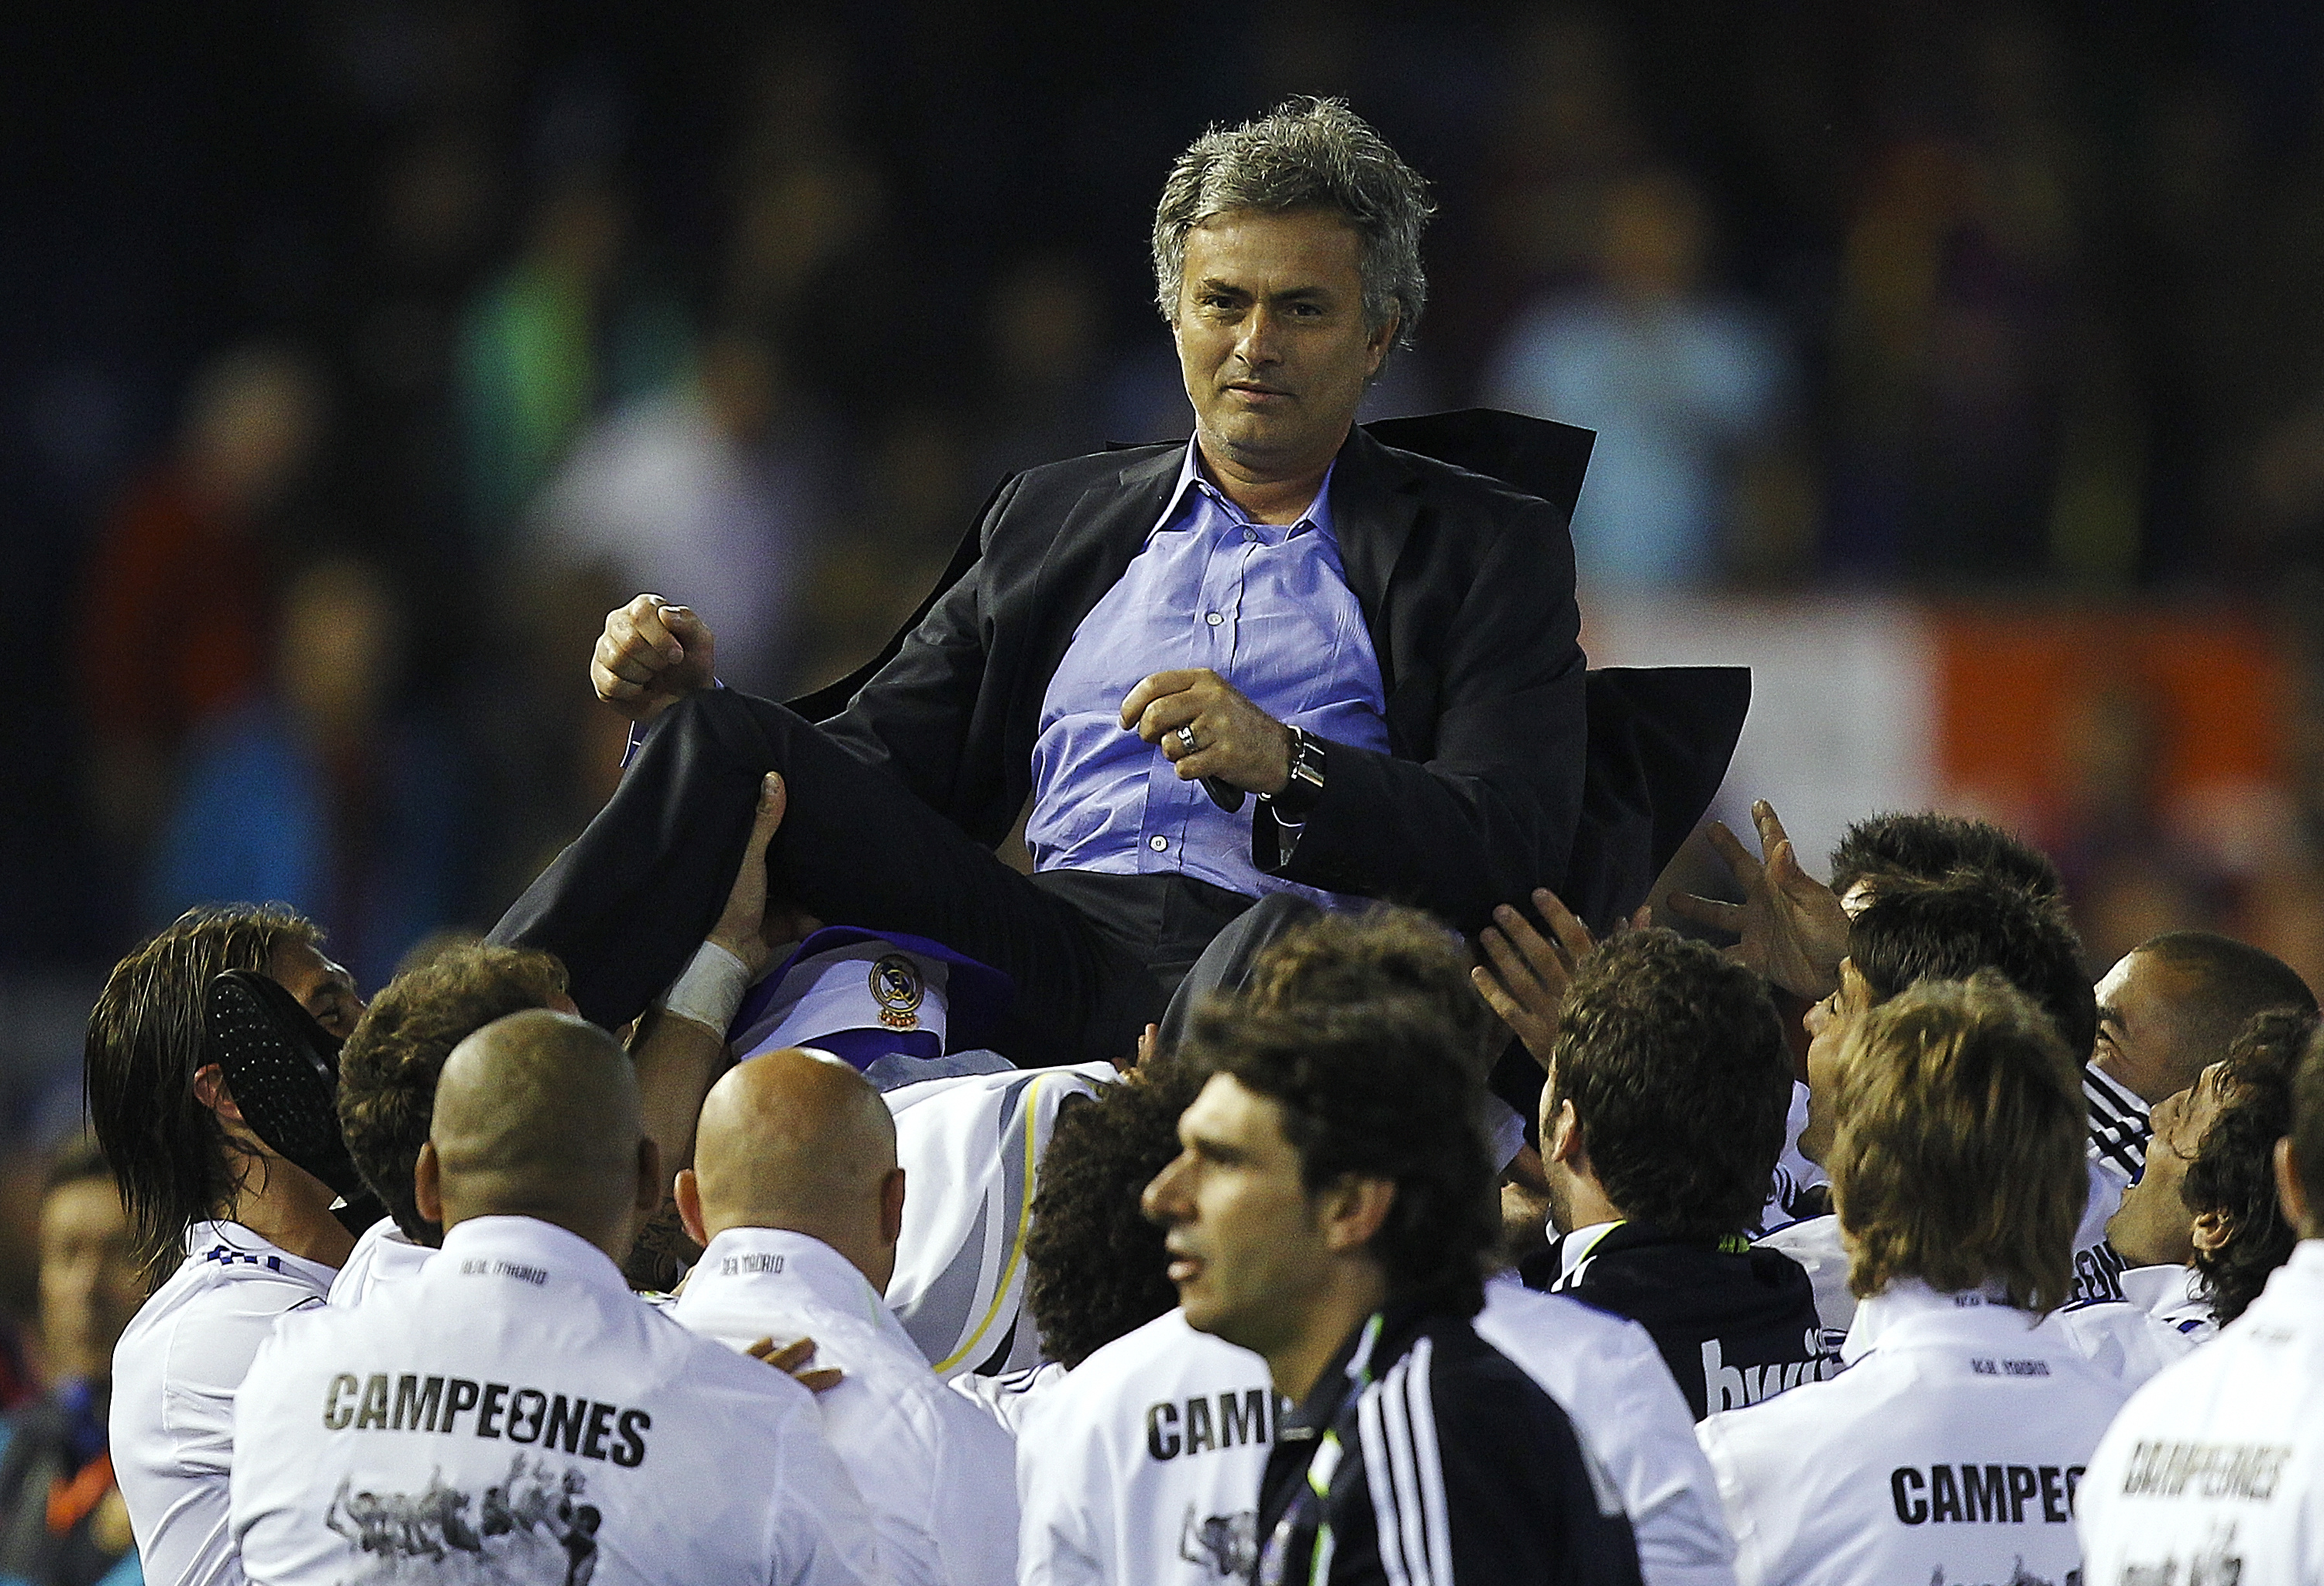 VALENCIA, BARCELONA - APRIL 20:  Head Coach Jose Mourinho of Real Madrid celebrates after the Copa del Rey final match between Real Madrid and Barcelona at Estadio Mestalla on April 20, 2011 in Valencia, Spain. Real Madrid won 1-0.  (Photo by Manuel Queim